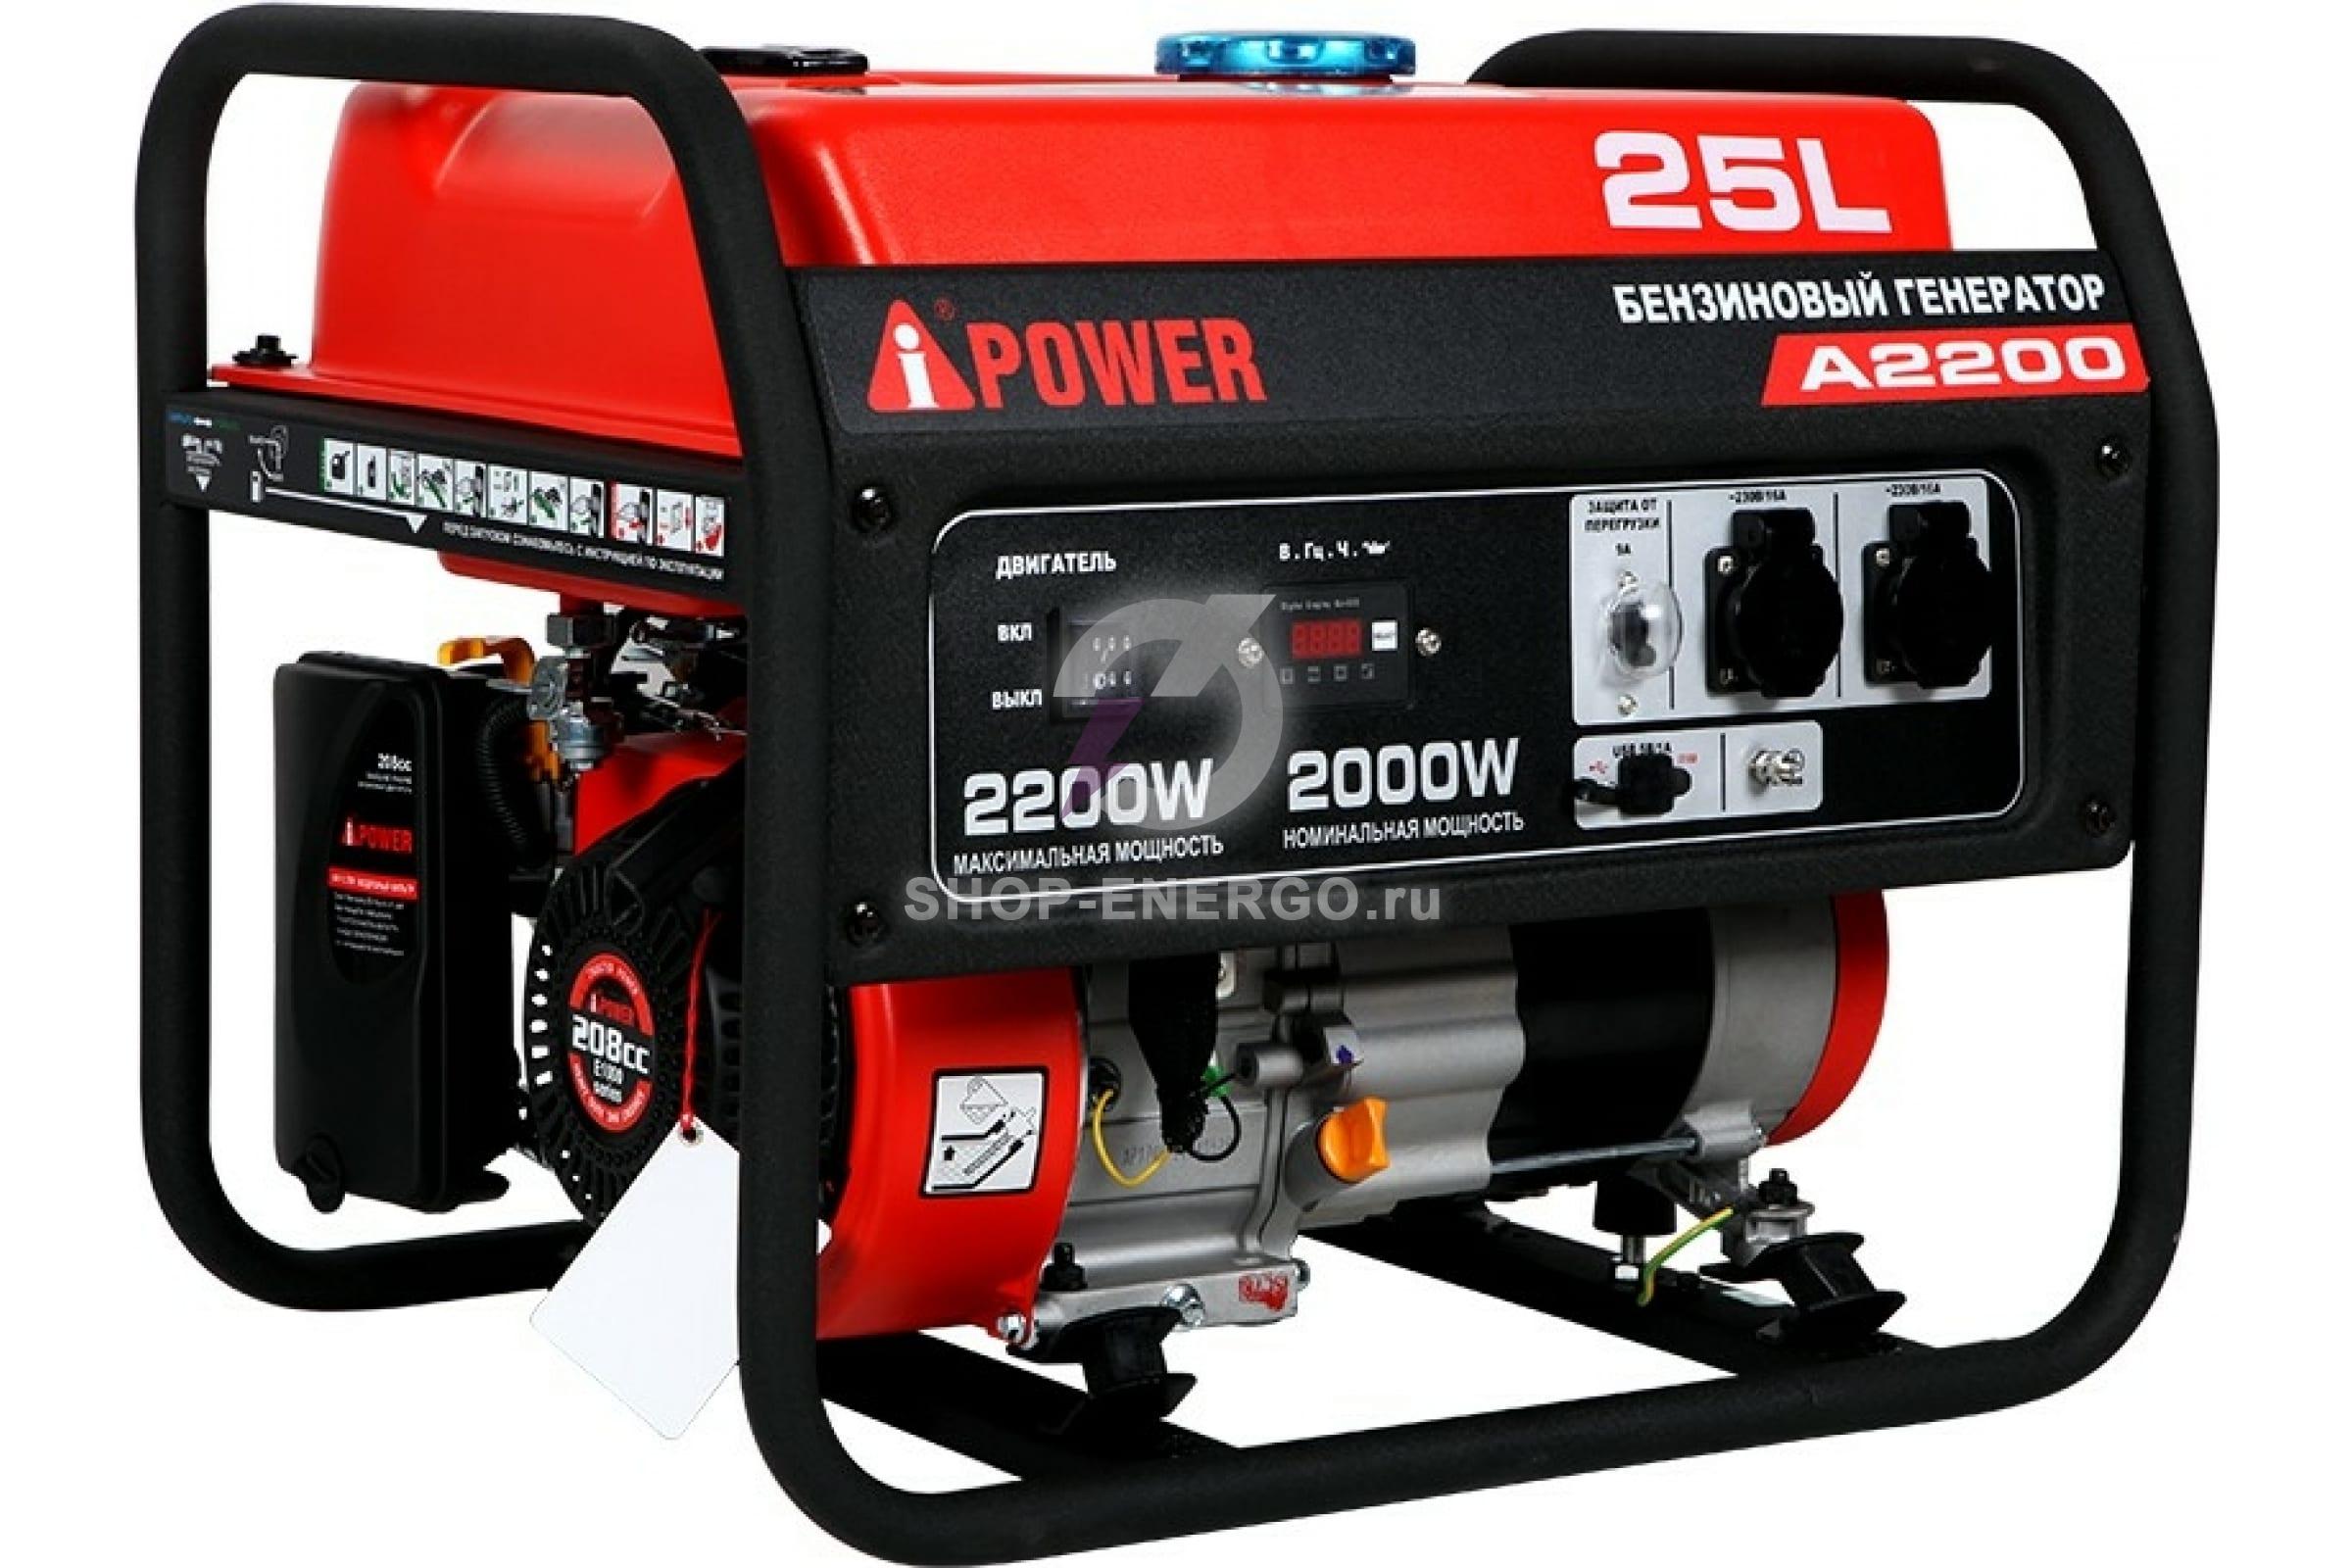   A-iPower A2200